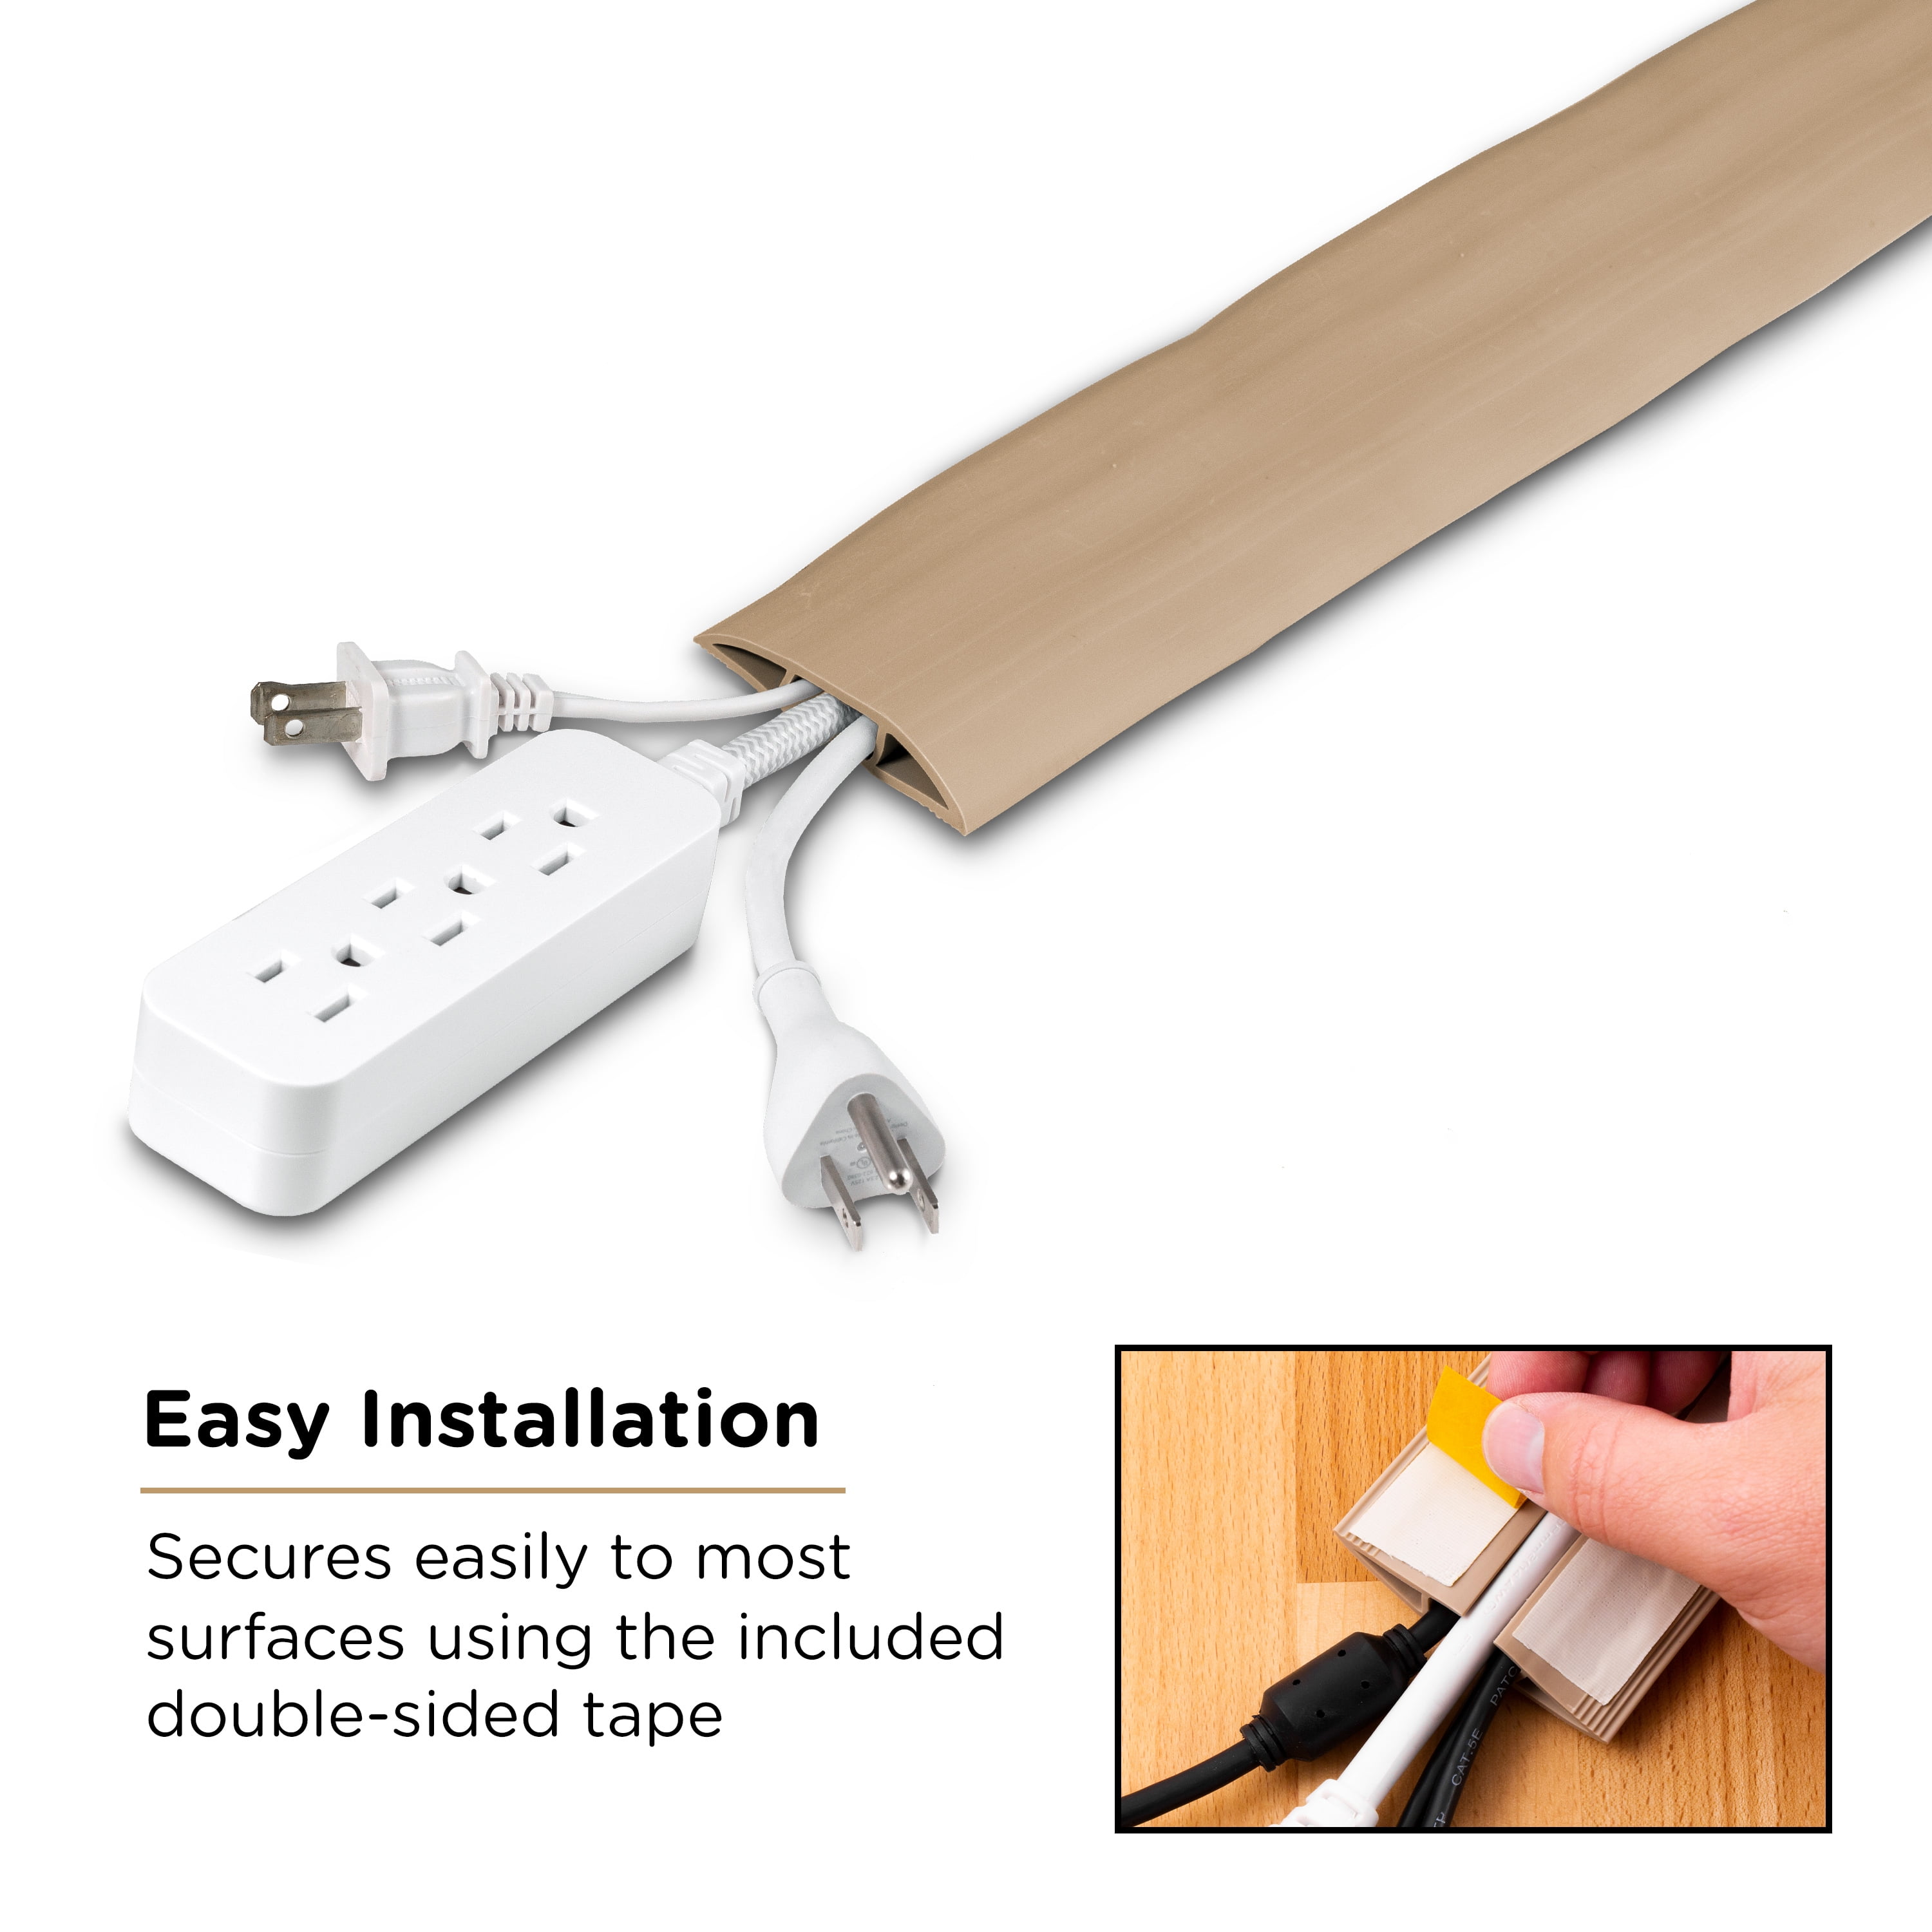 Cordinate 6 ft Cord Cover Floor, Cord Protector, Cord Management, Cord  Concealer, Cable Hider and Cable Raceway, Extension Cord Cover, Tan, 49629